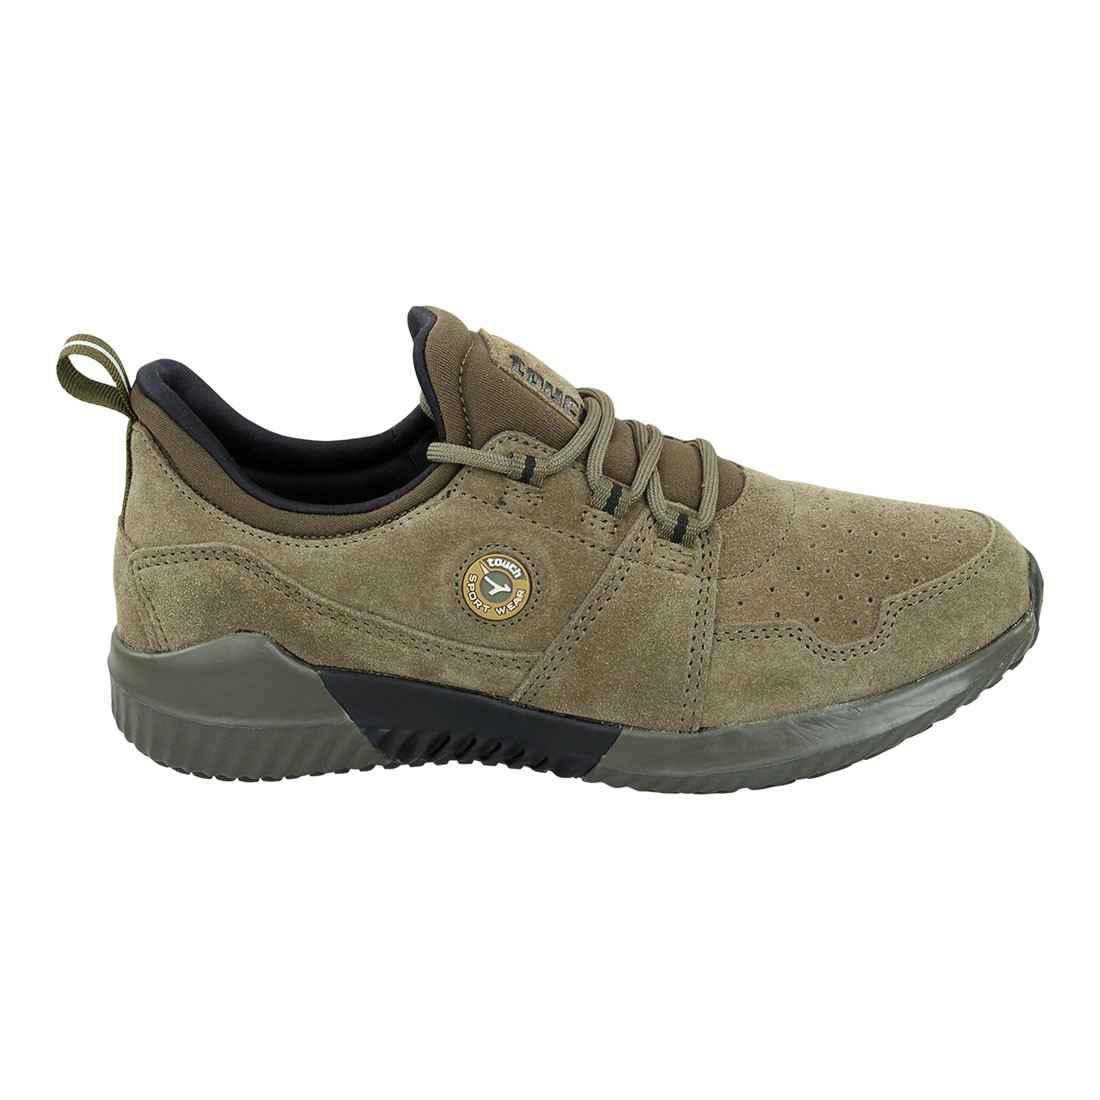 Touch - 1030 - Olive